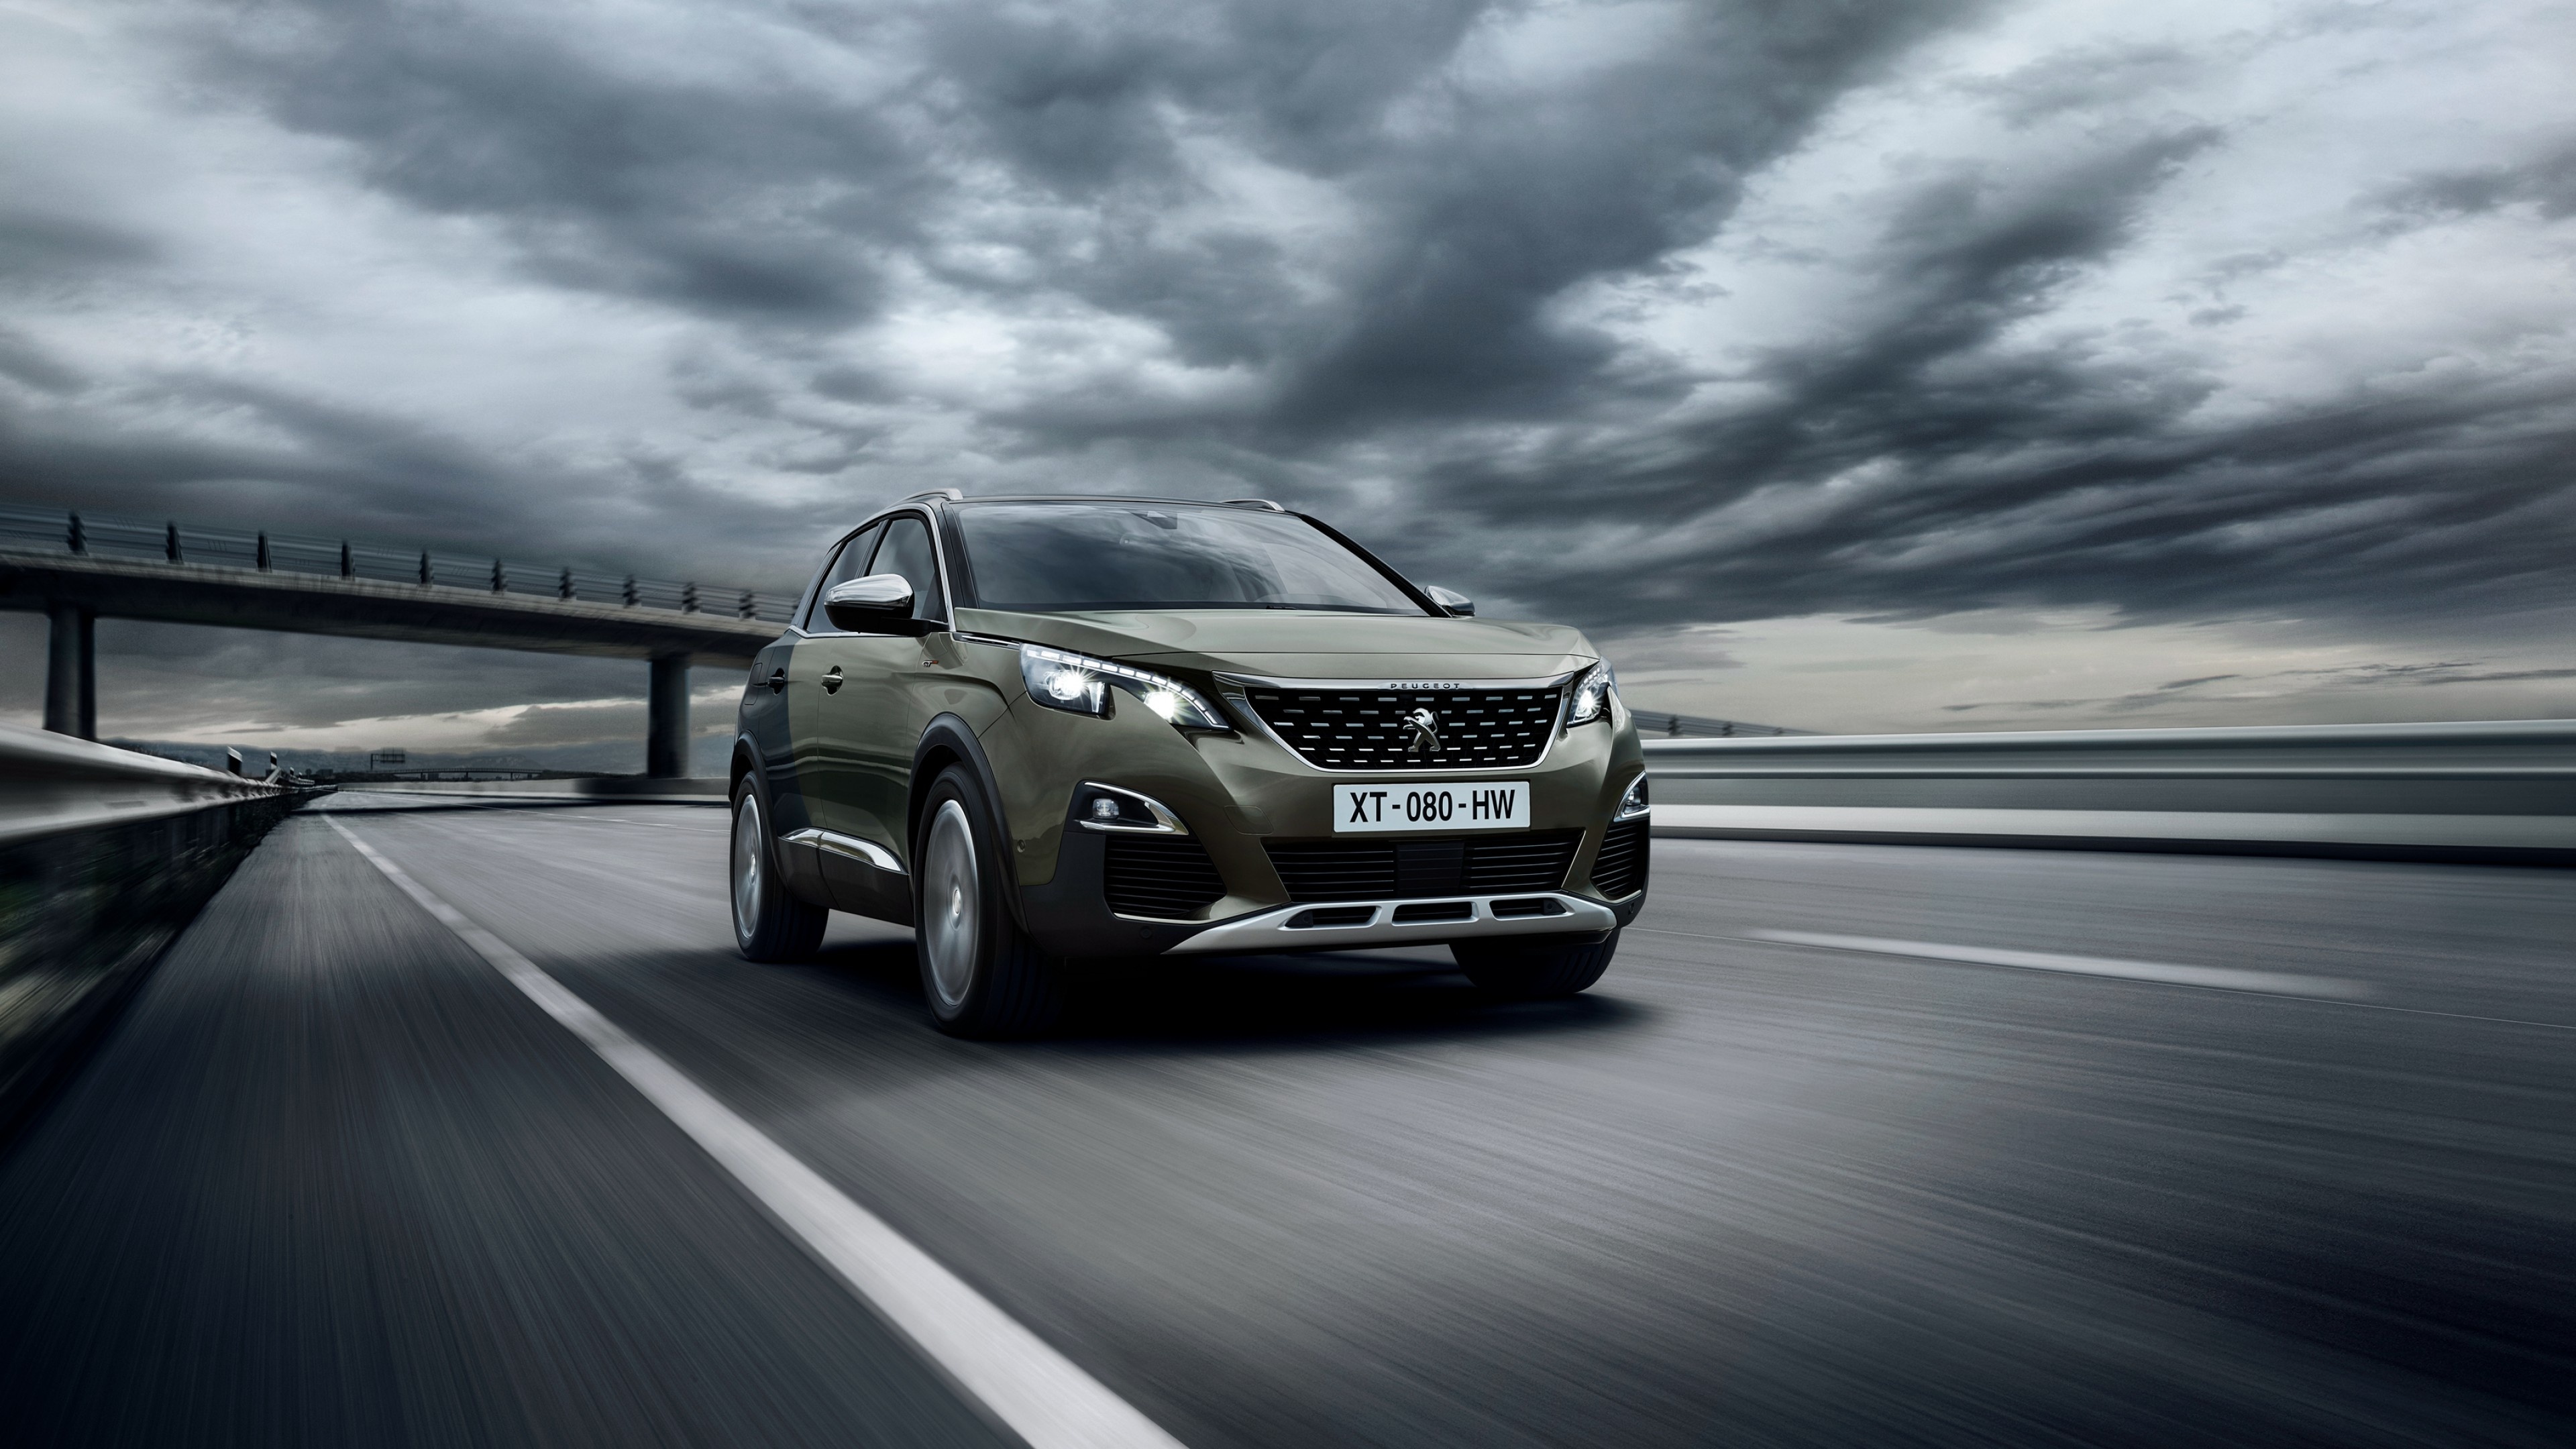 Peugeot 3008, GT Line, Stylish crossover, Car and bike enthusiasts, 3840x2160 4K Desktop